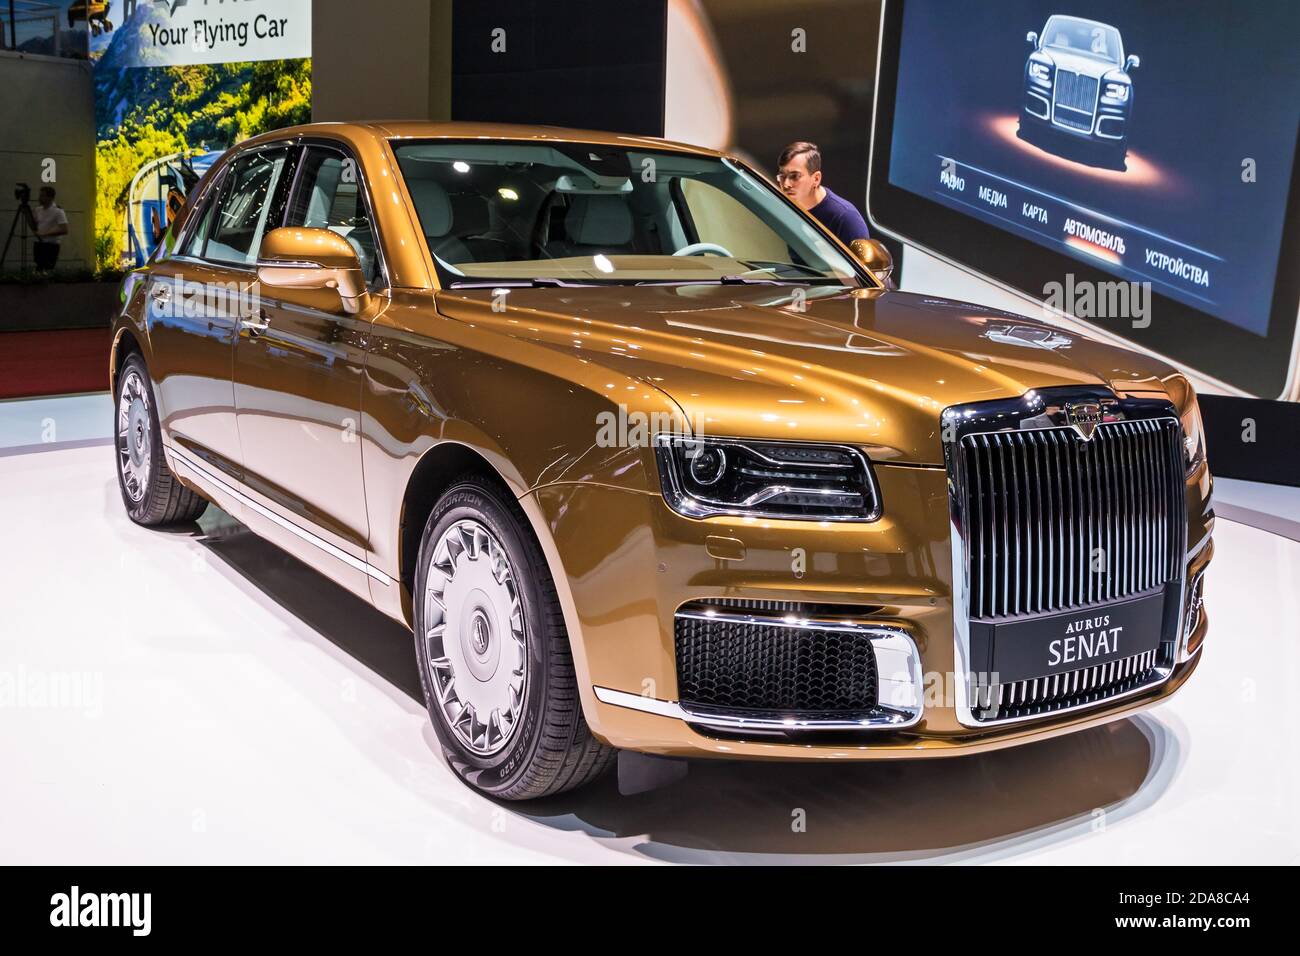 MOSCOW, AUG.31, 2018: New All Wheel Drive Powerful Russian Luxury Car Aurus  Senat on Automotive Exhibition MMAC 2018 Editorial Photo - Image of  graceful, industrial: 125221361